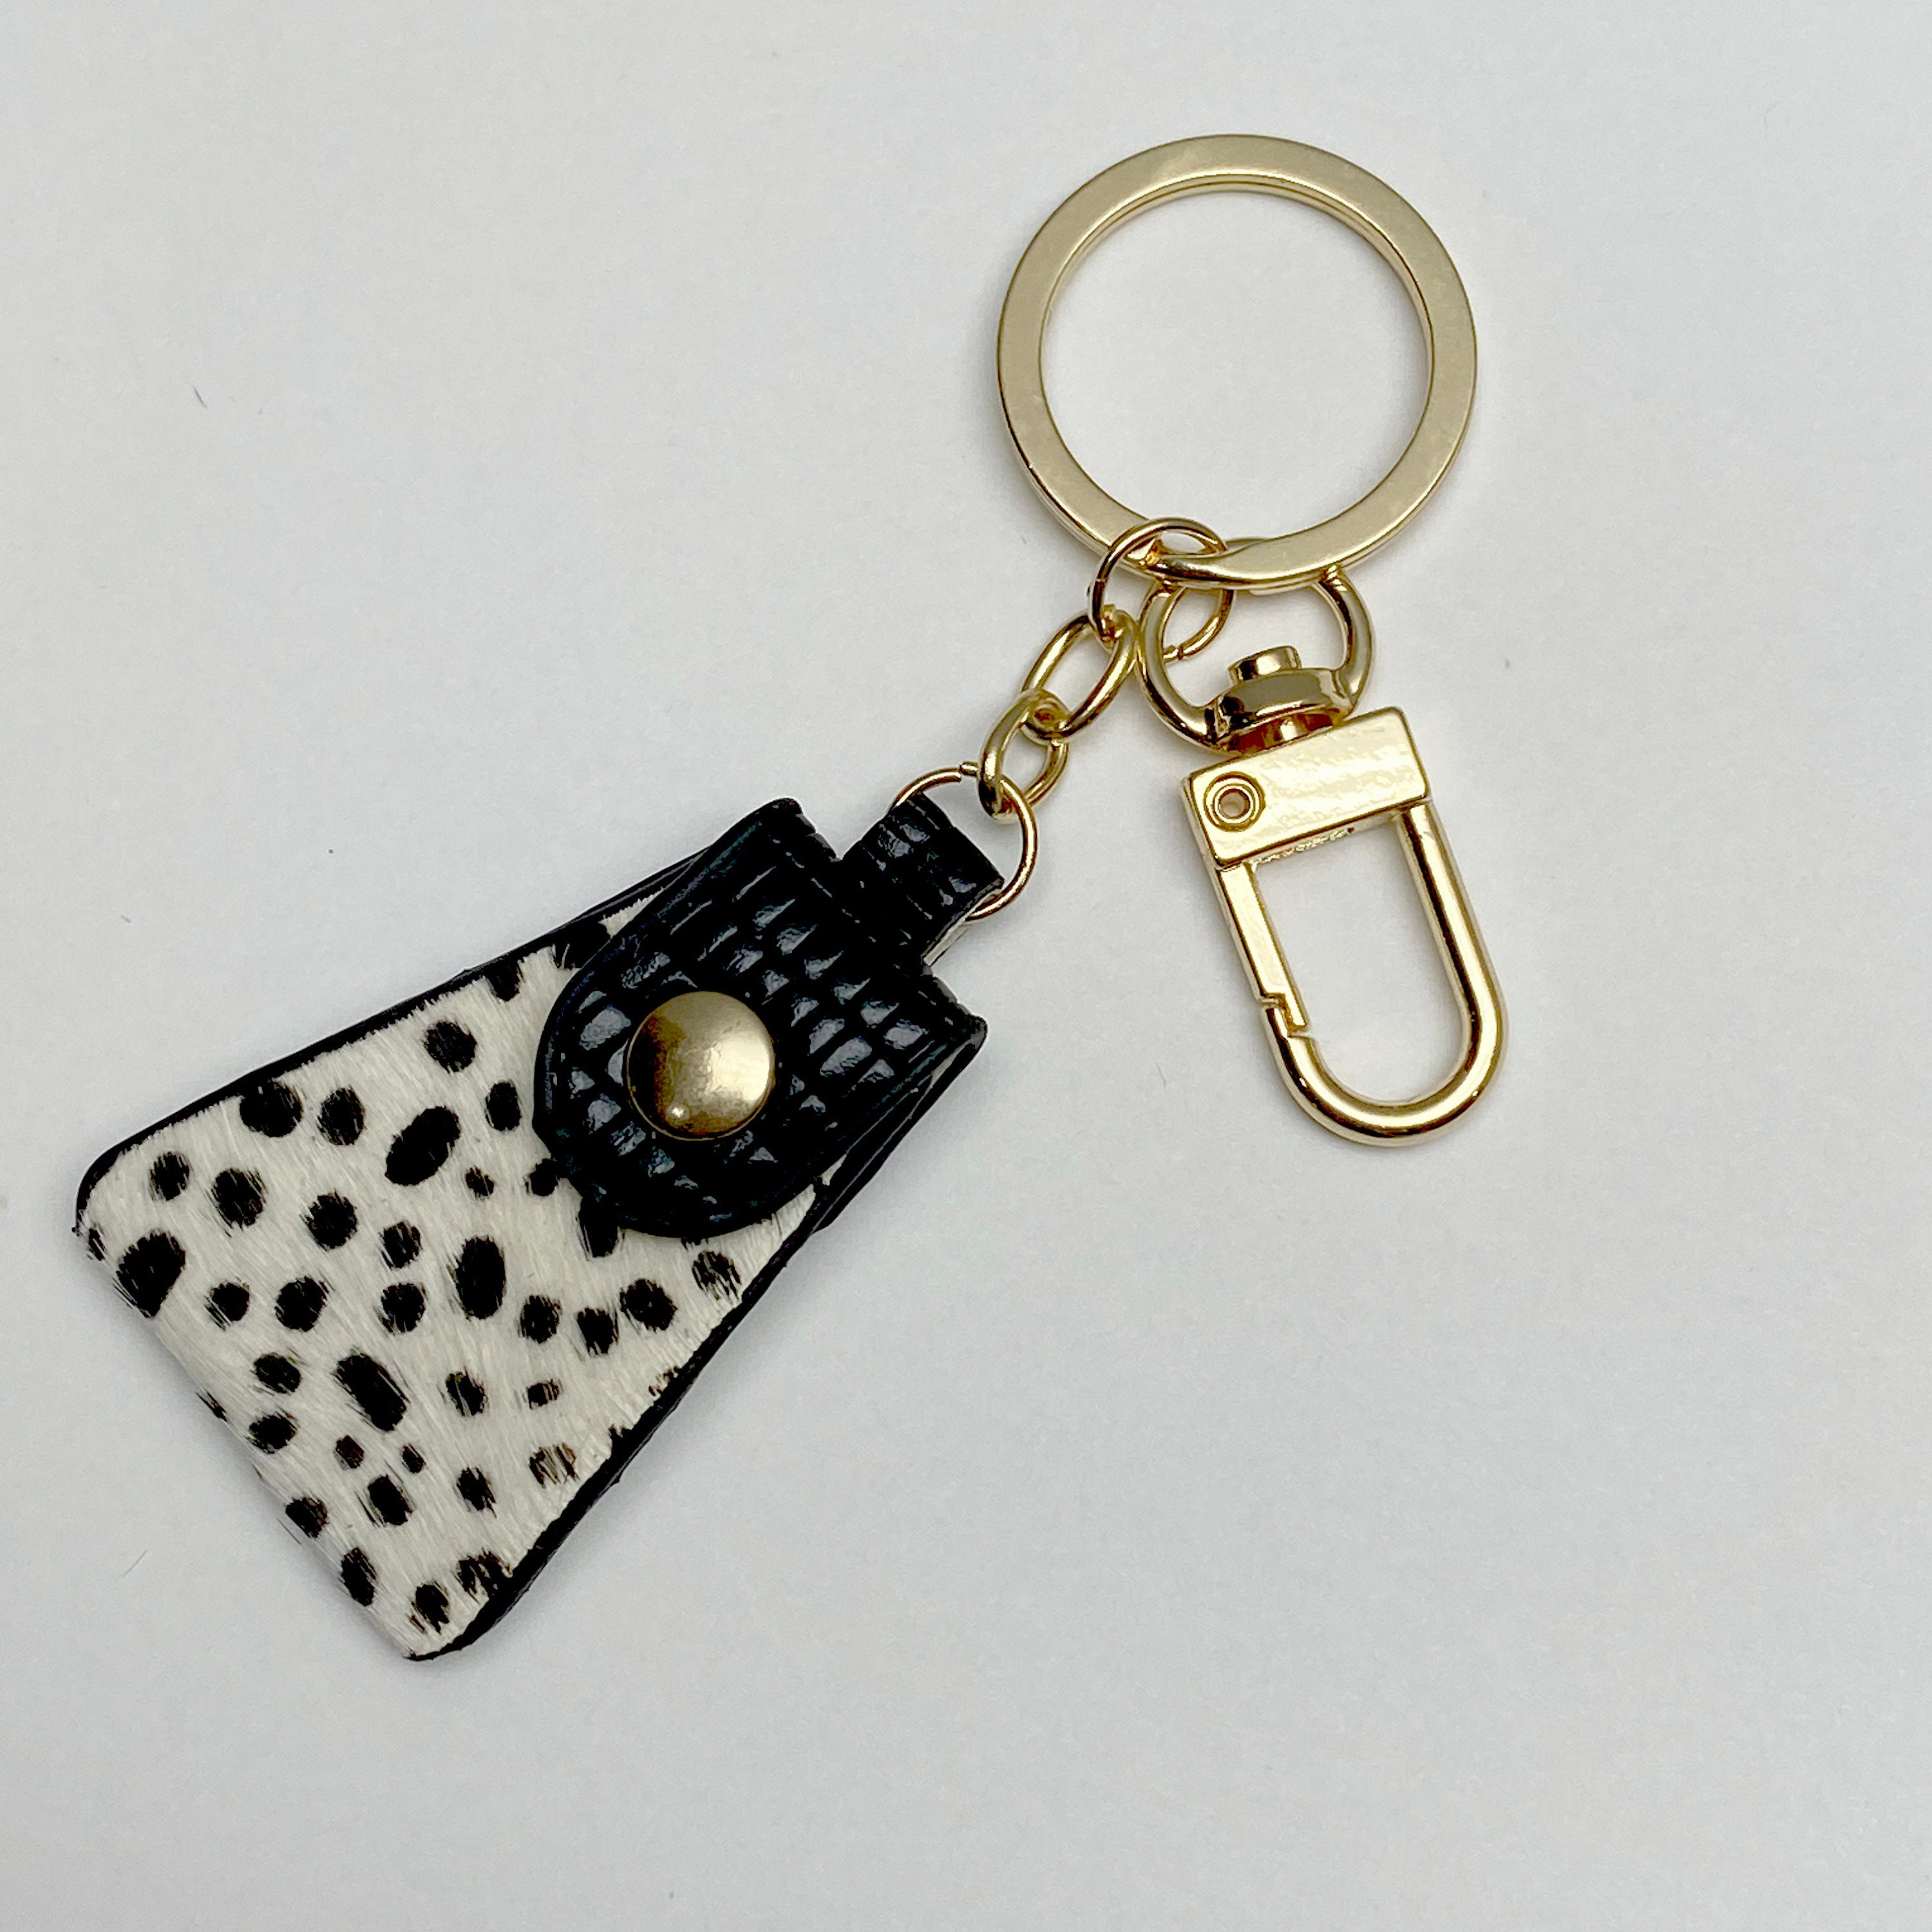 Genuine Leather Key Chain Key Rings with 4 Pcs Snap Button Charms Jewelry Vb-030